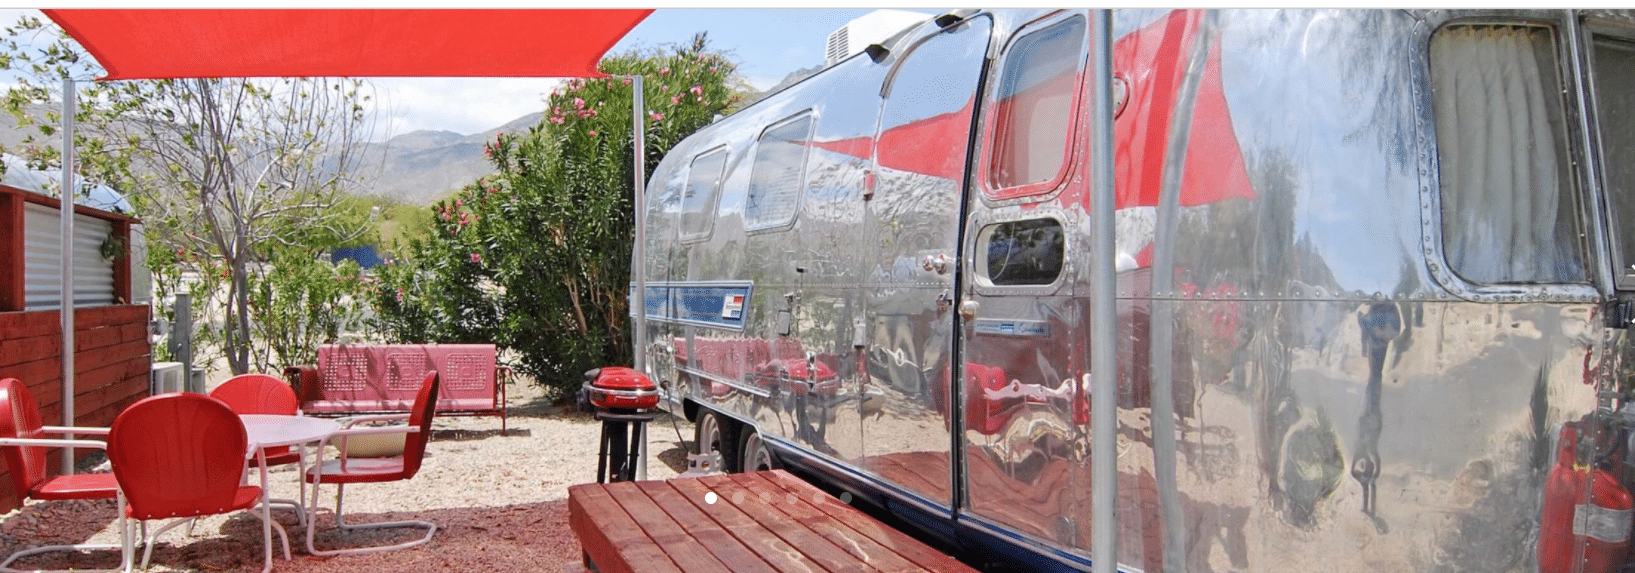 A vintage airstream parked in a site surrounded by vintage furniture.